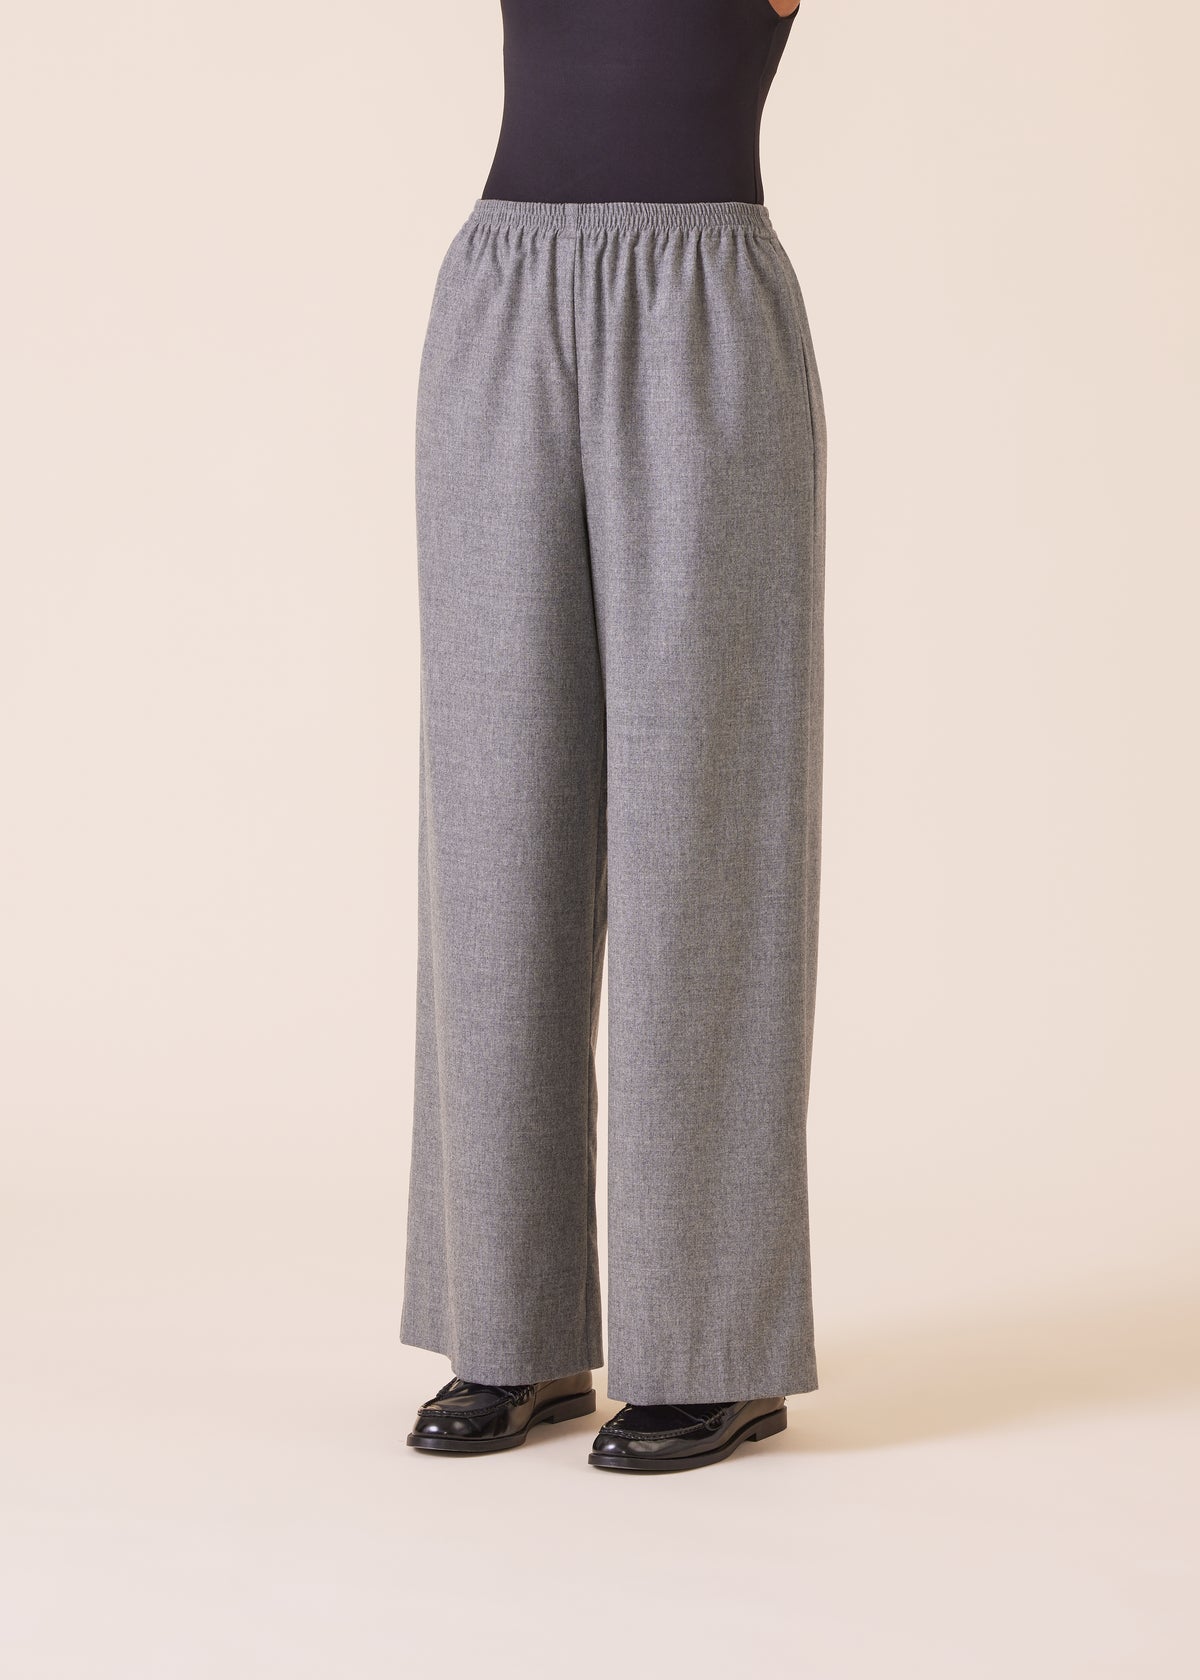 wool cashmere mix flared trouser